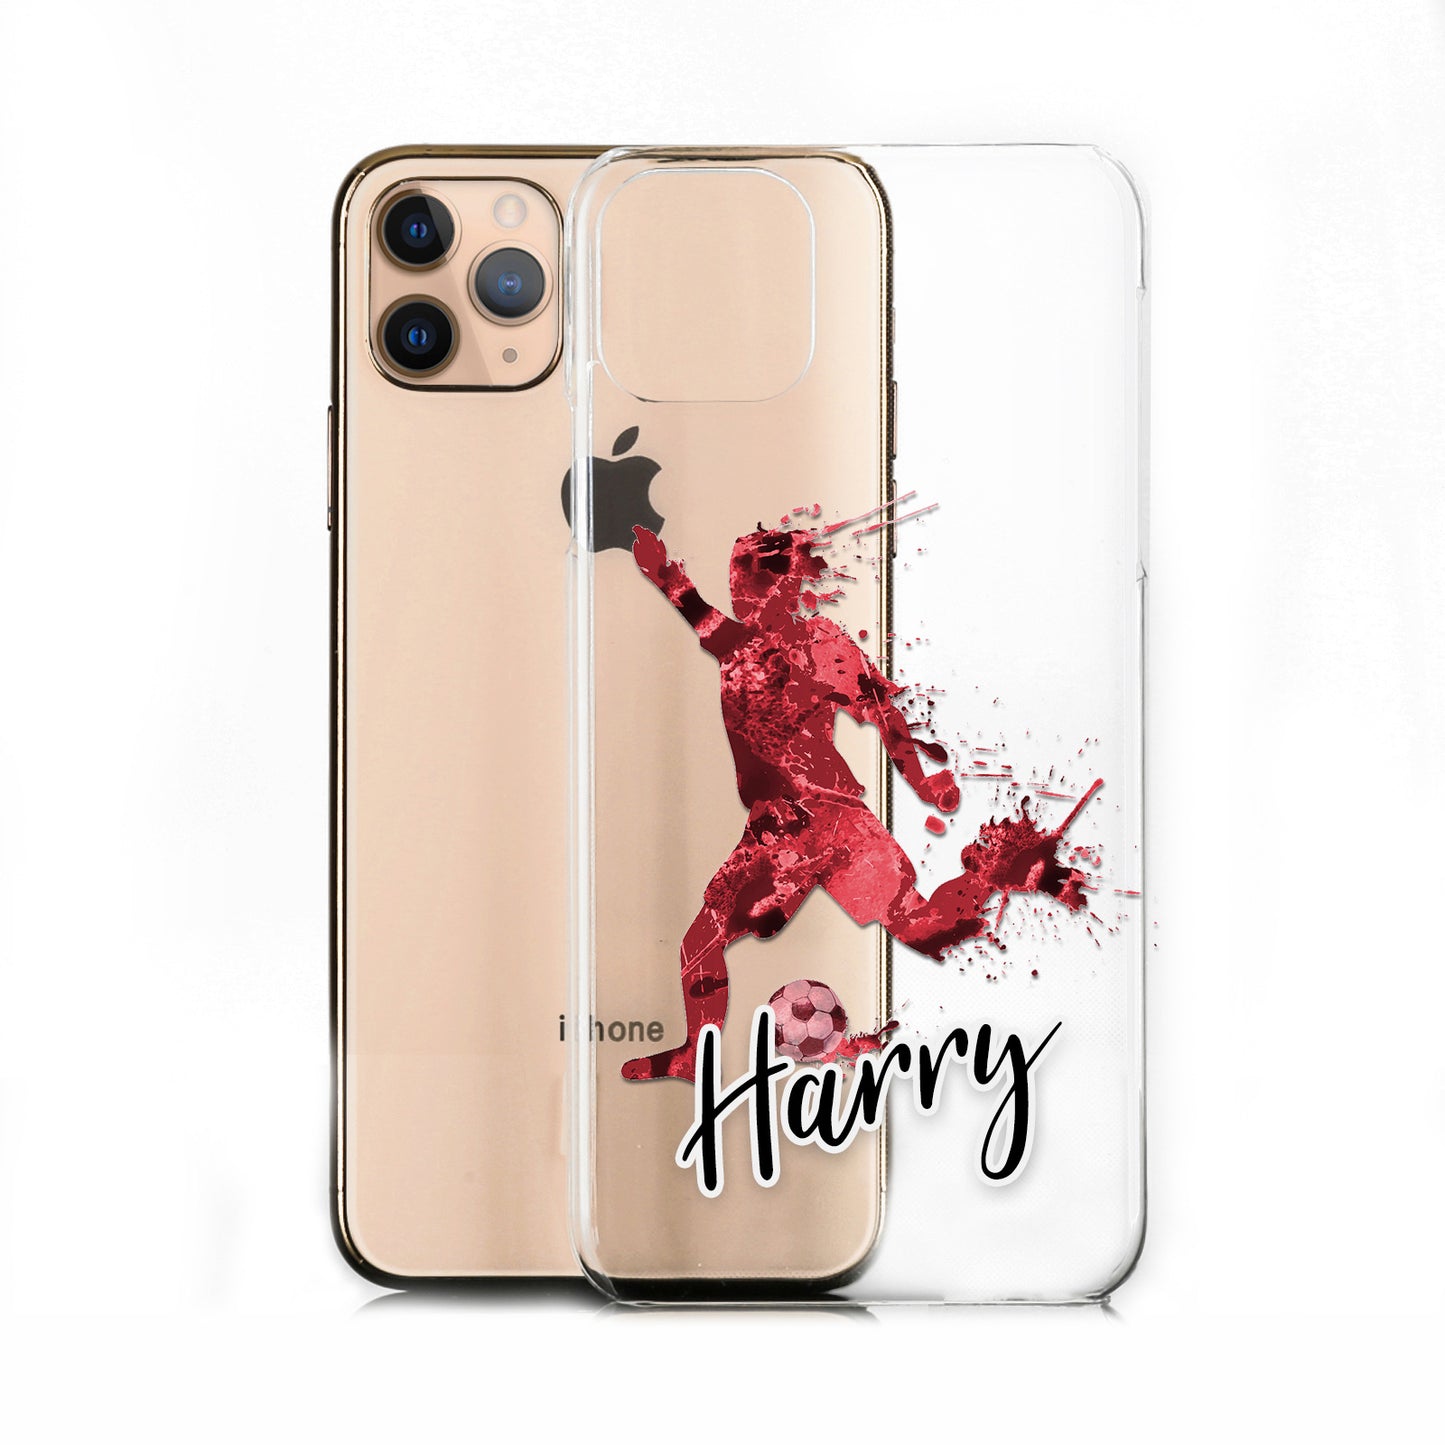 Personalised HTC Phone Hard Case - Vibrant Red Football Star with White Outlined Text